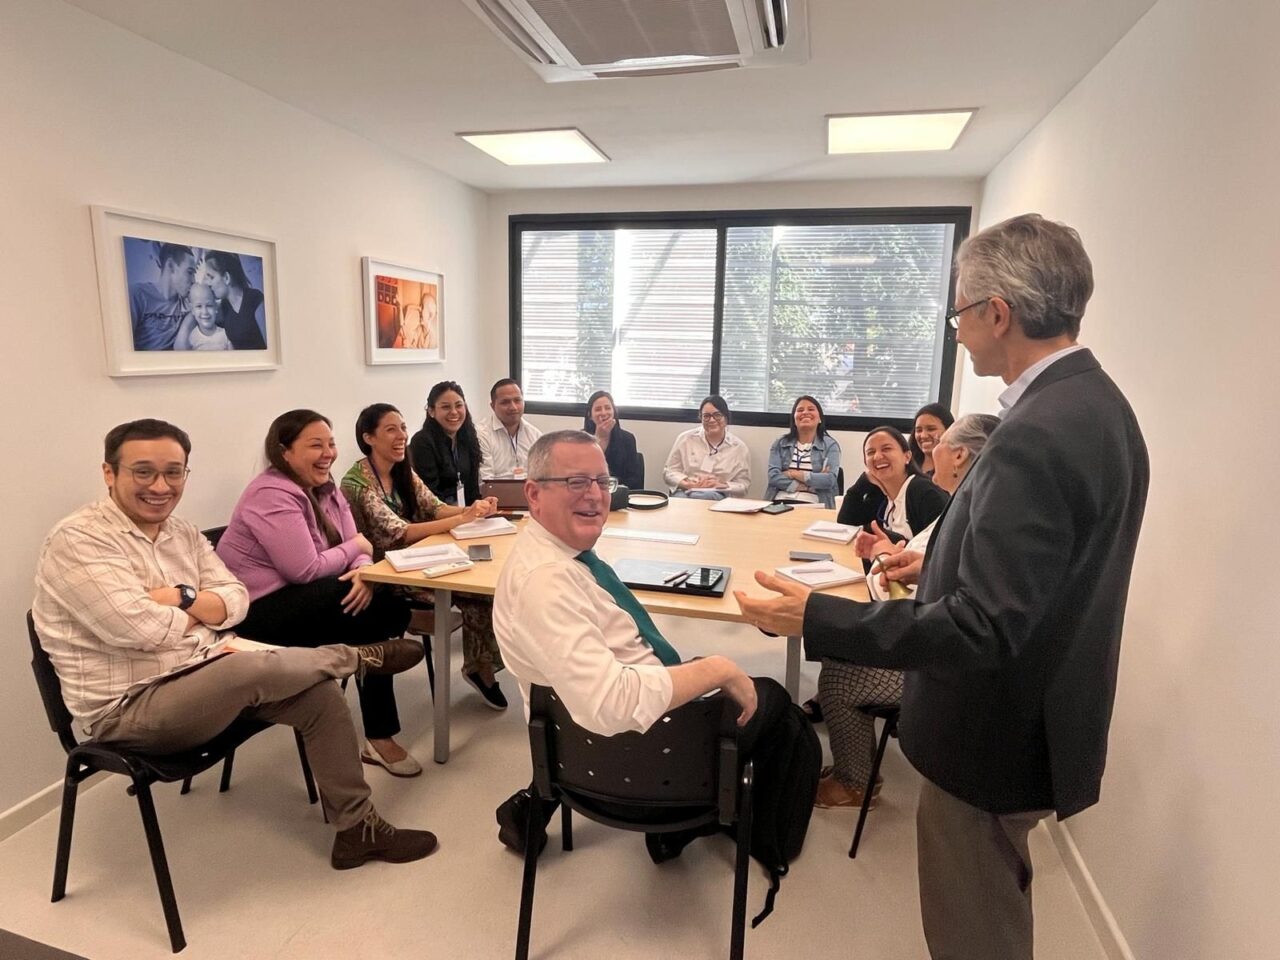 Guillermo Chantada: The Latam Prinses Máxima Centrum for Pediatric Oncology Mastercourse is generating a lot of interaction, discussion and great science